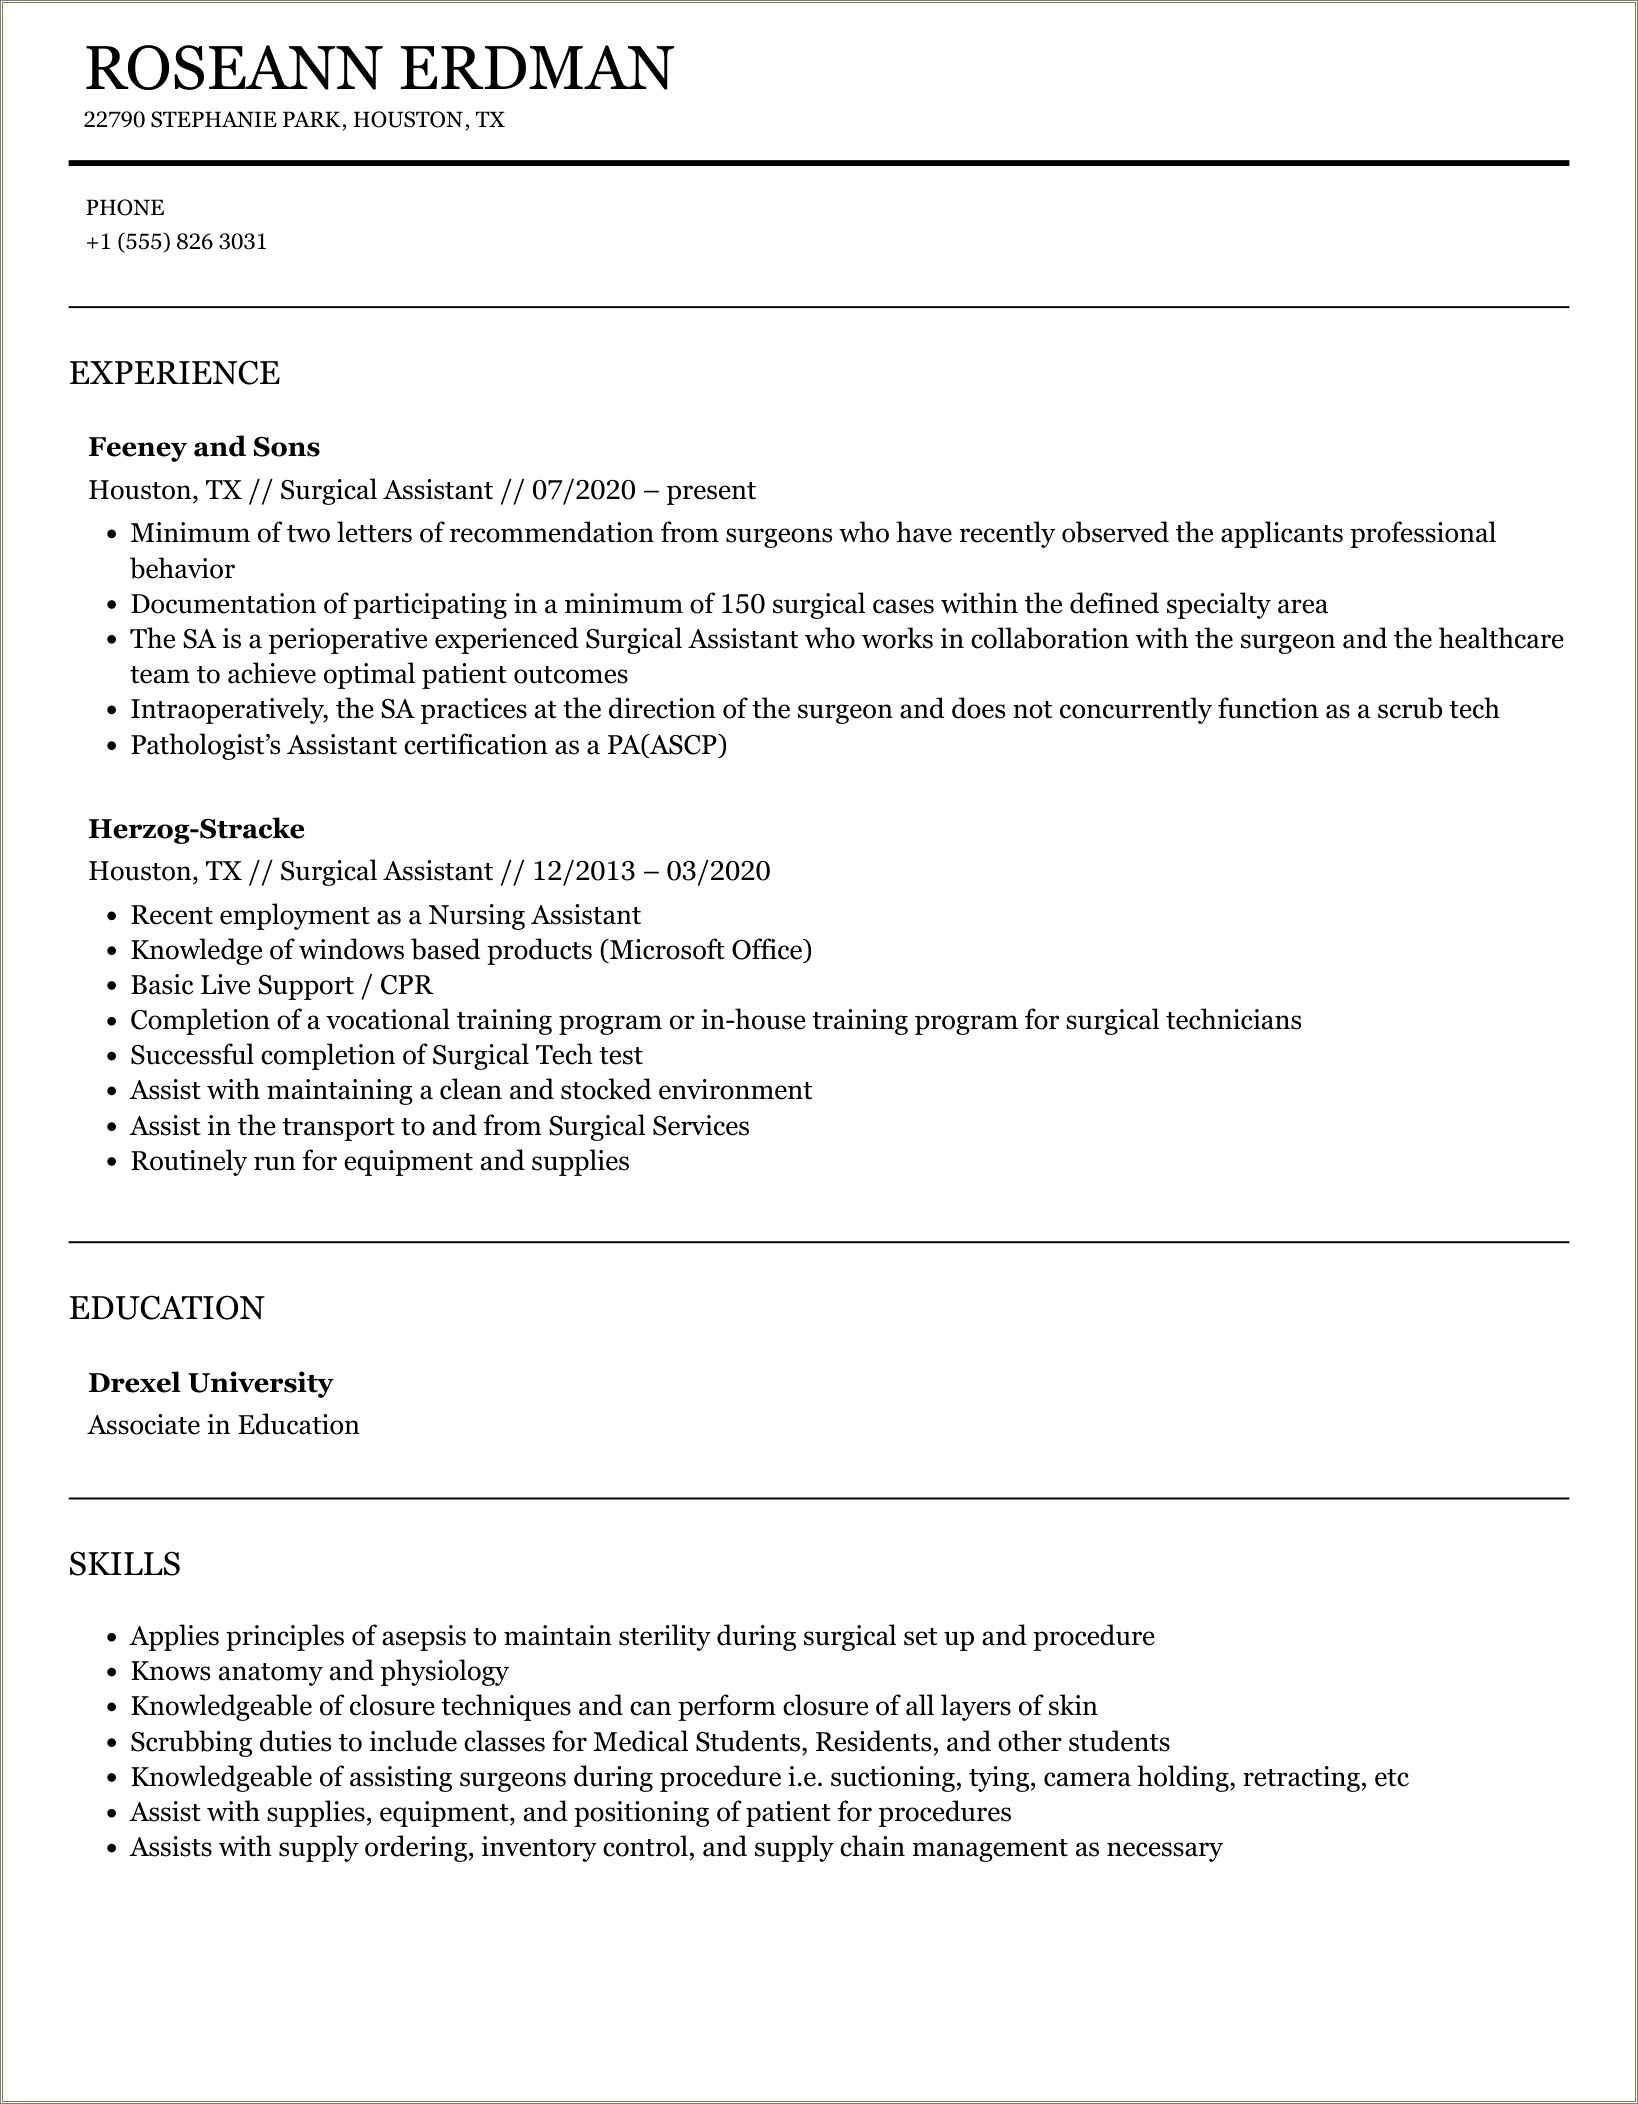 Hand Surgical First Assistant Resume Samples